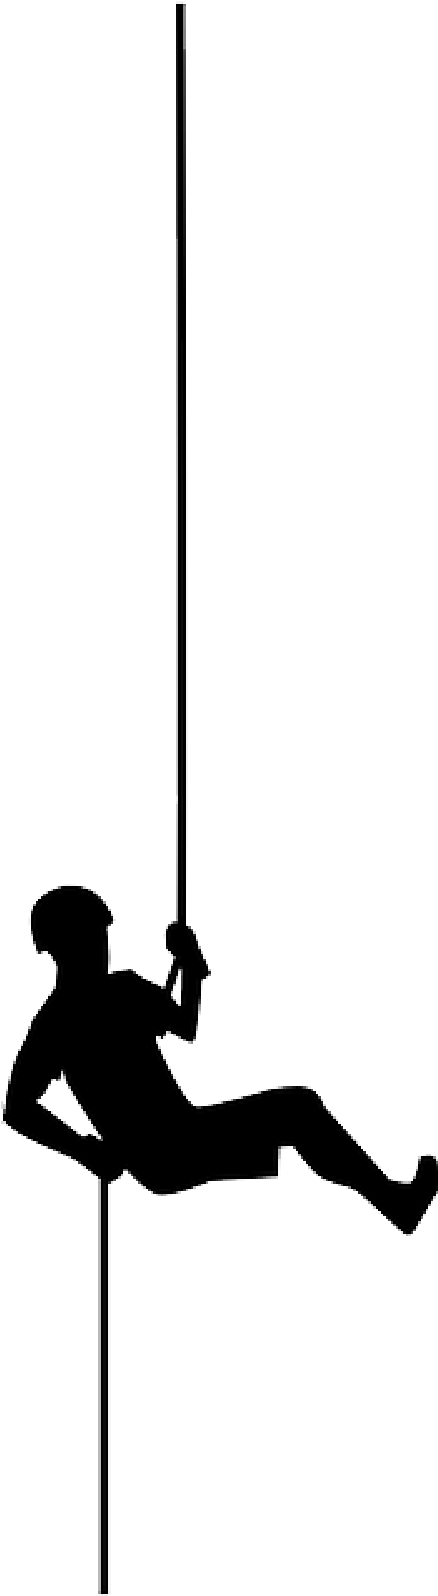 Mb Image/png - Rappelling Silhouette Png (800x1600), Png Download